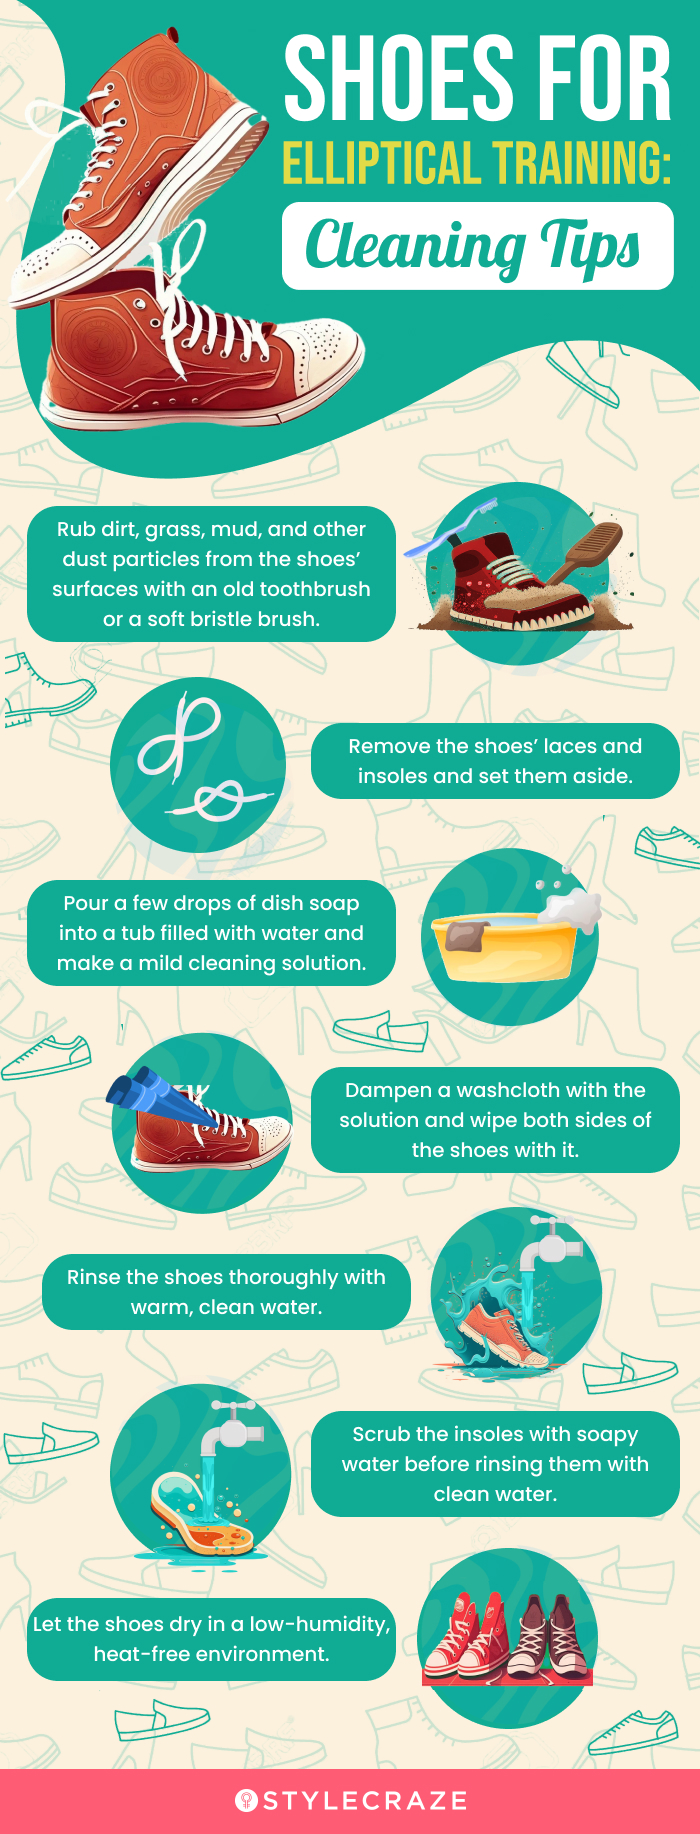 Shoes For Elliptical Training: Cleaning Tips (infographic)